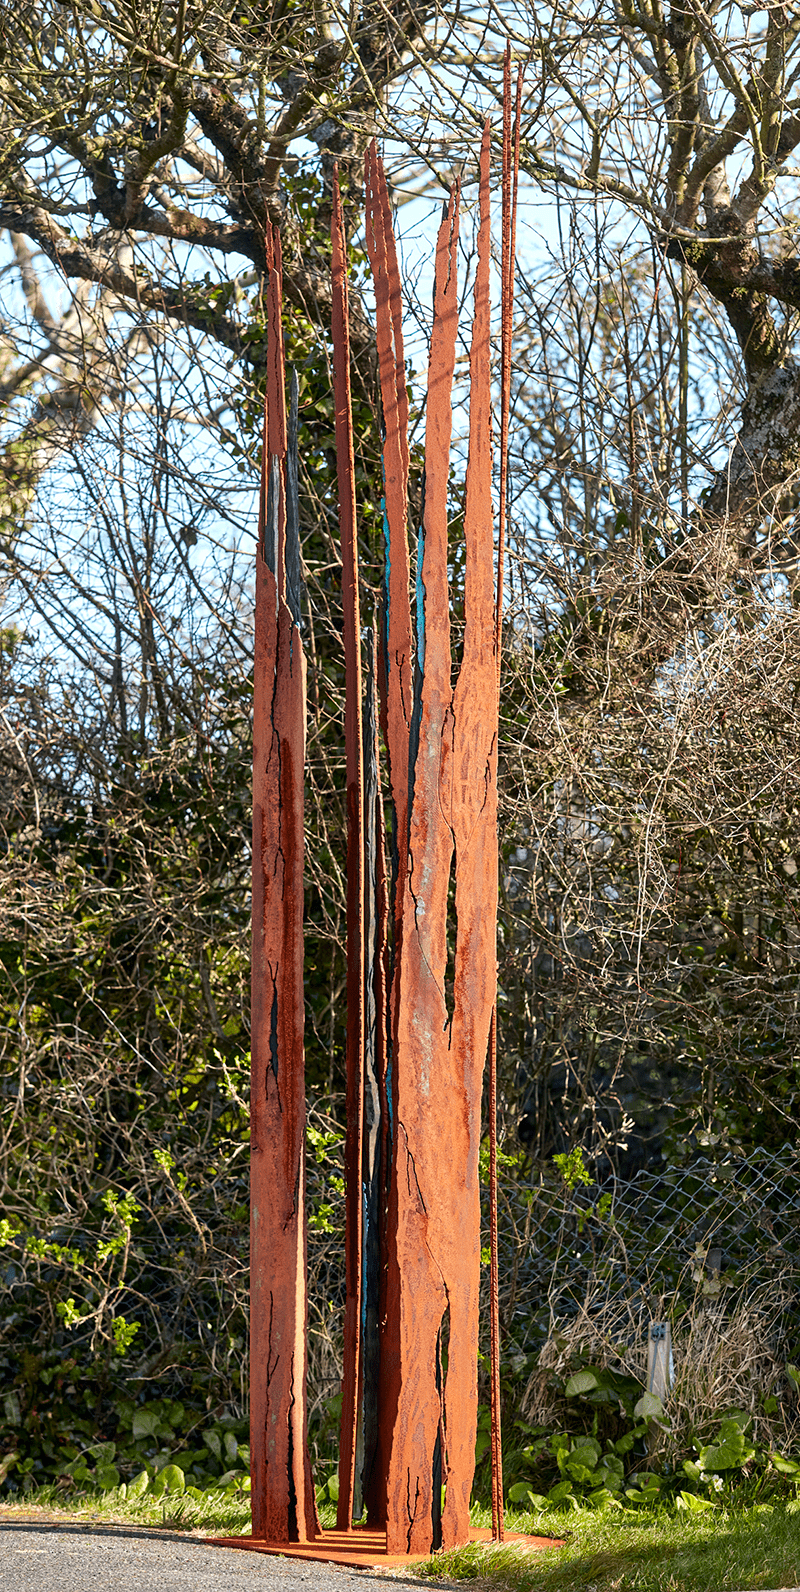 Chandler_Christopher_FragmentsXV Carved Cornish oak and plasma cut steel with patinated copper. Fragments XV is part of the Maelstrom series of sculptures that evolved during lockdowns 2020/2021 as an analogy of the Covid storm that was raging in the world